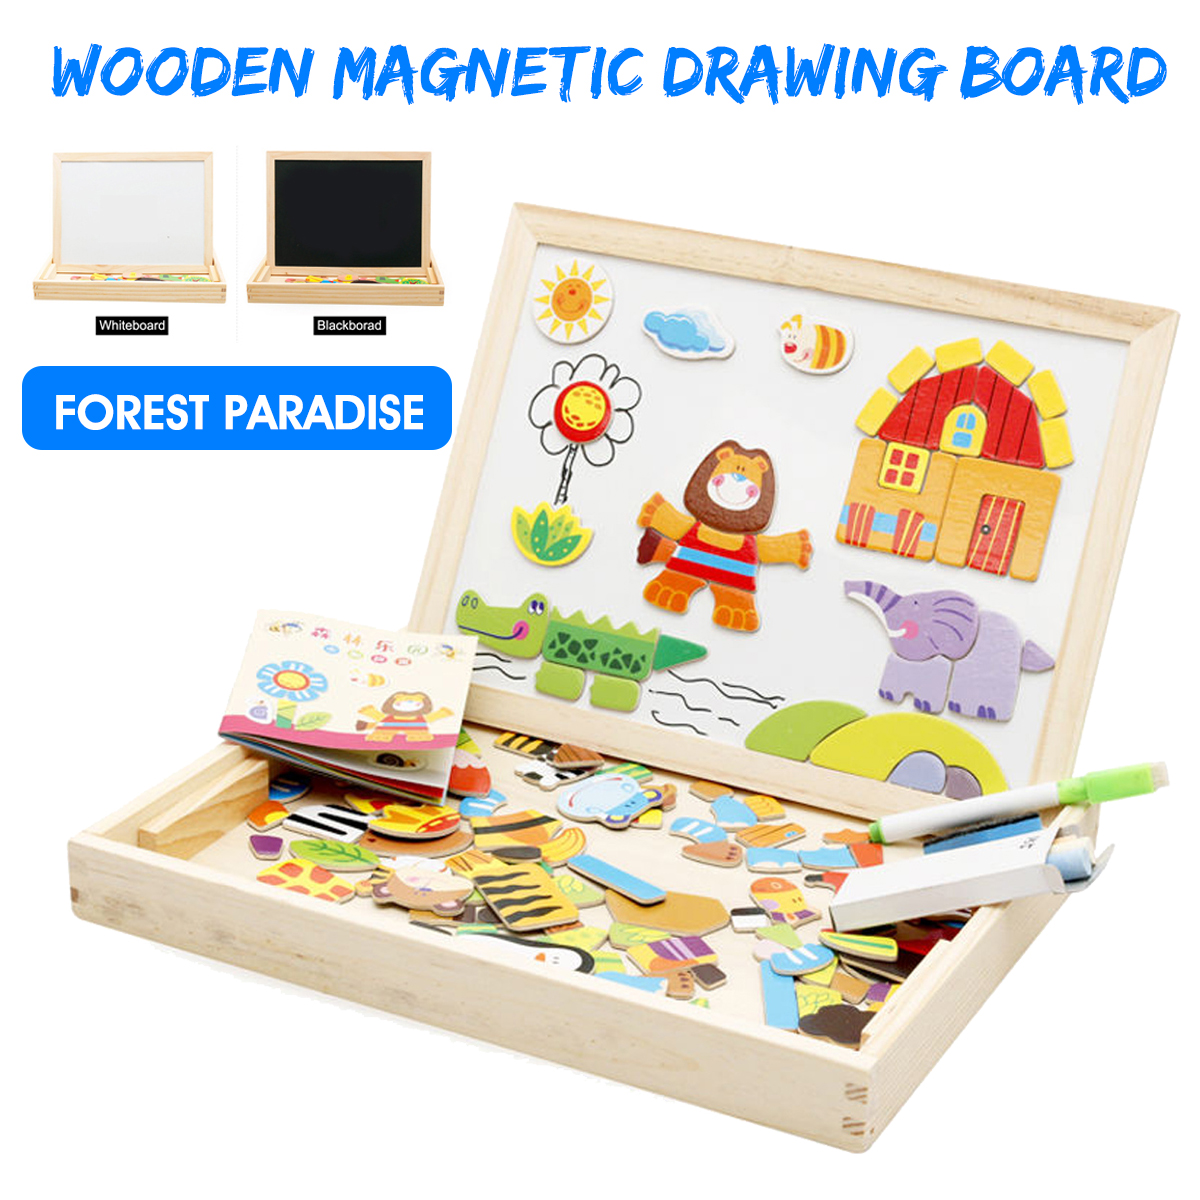 Wooden-DIY-Magnetic-Drawing-Board-Forest-Paradise-Childrens-Early-Educational-Learning-Toys-1676971-2